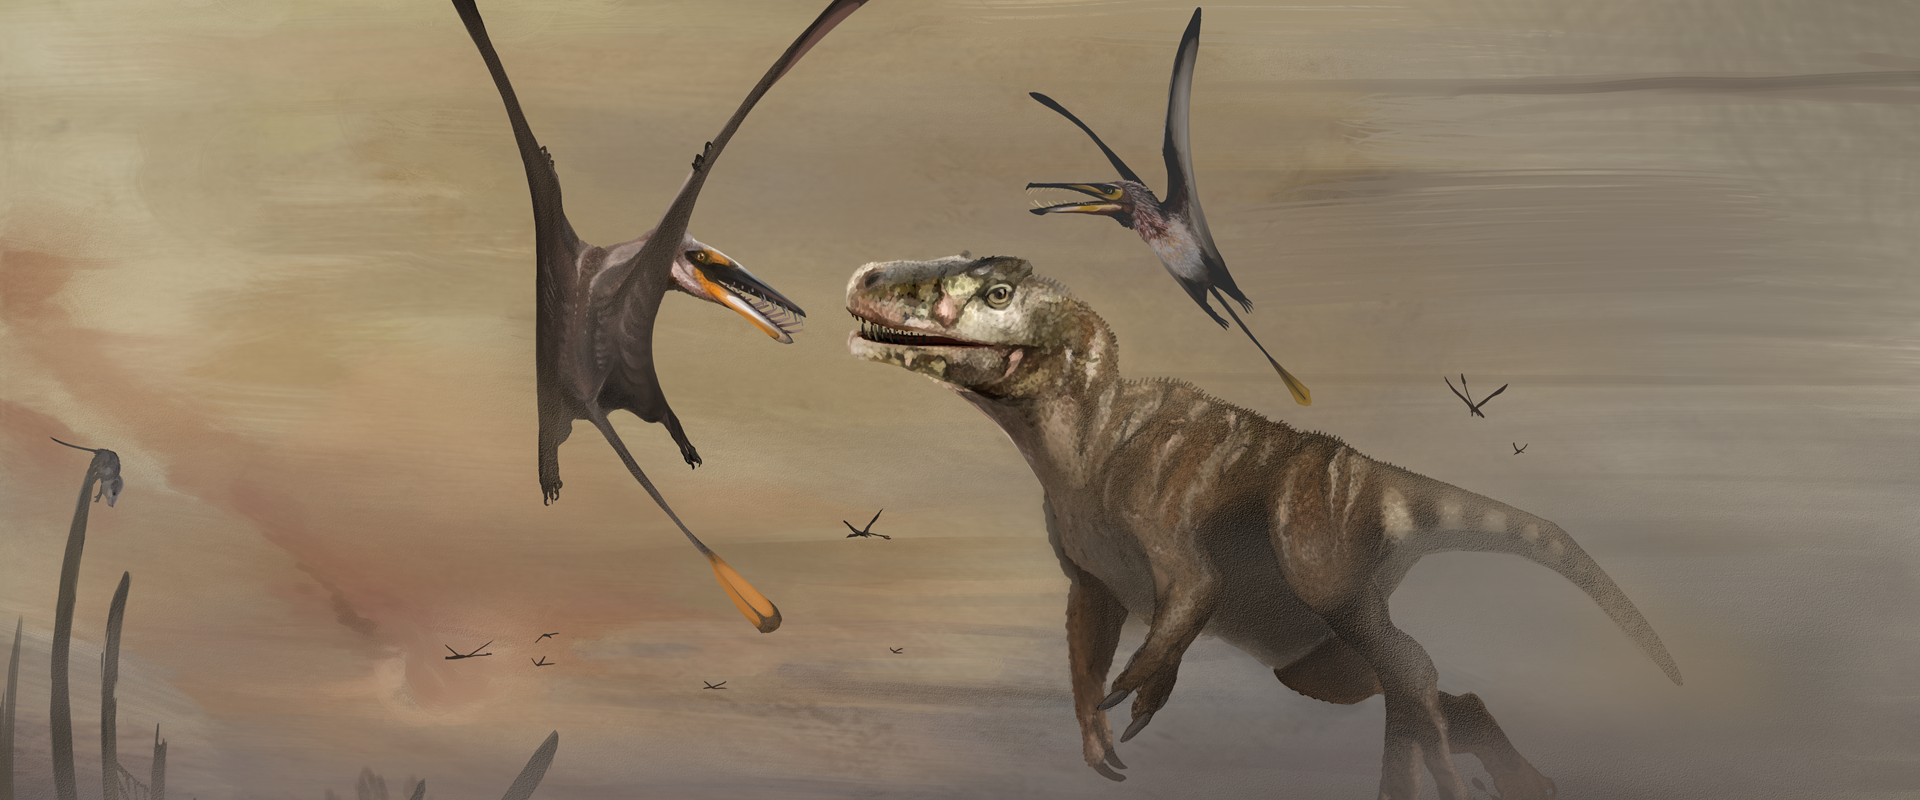 Pterosaurs PNG Image - PNG All